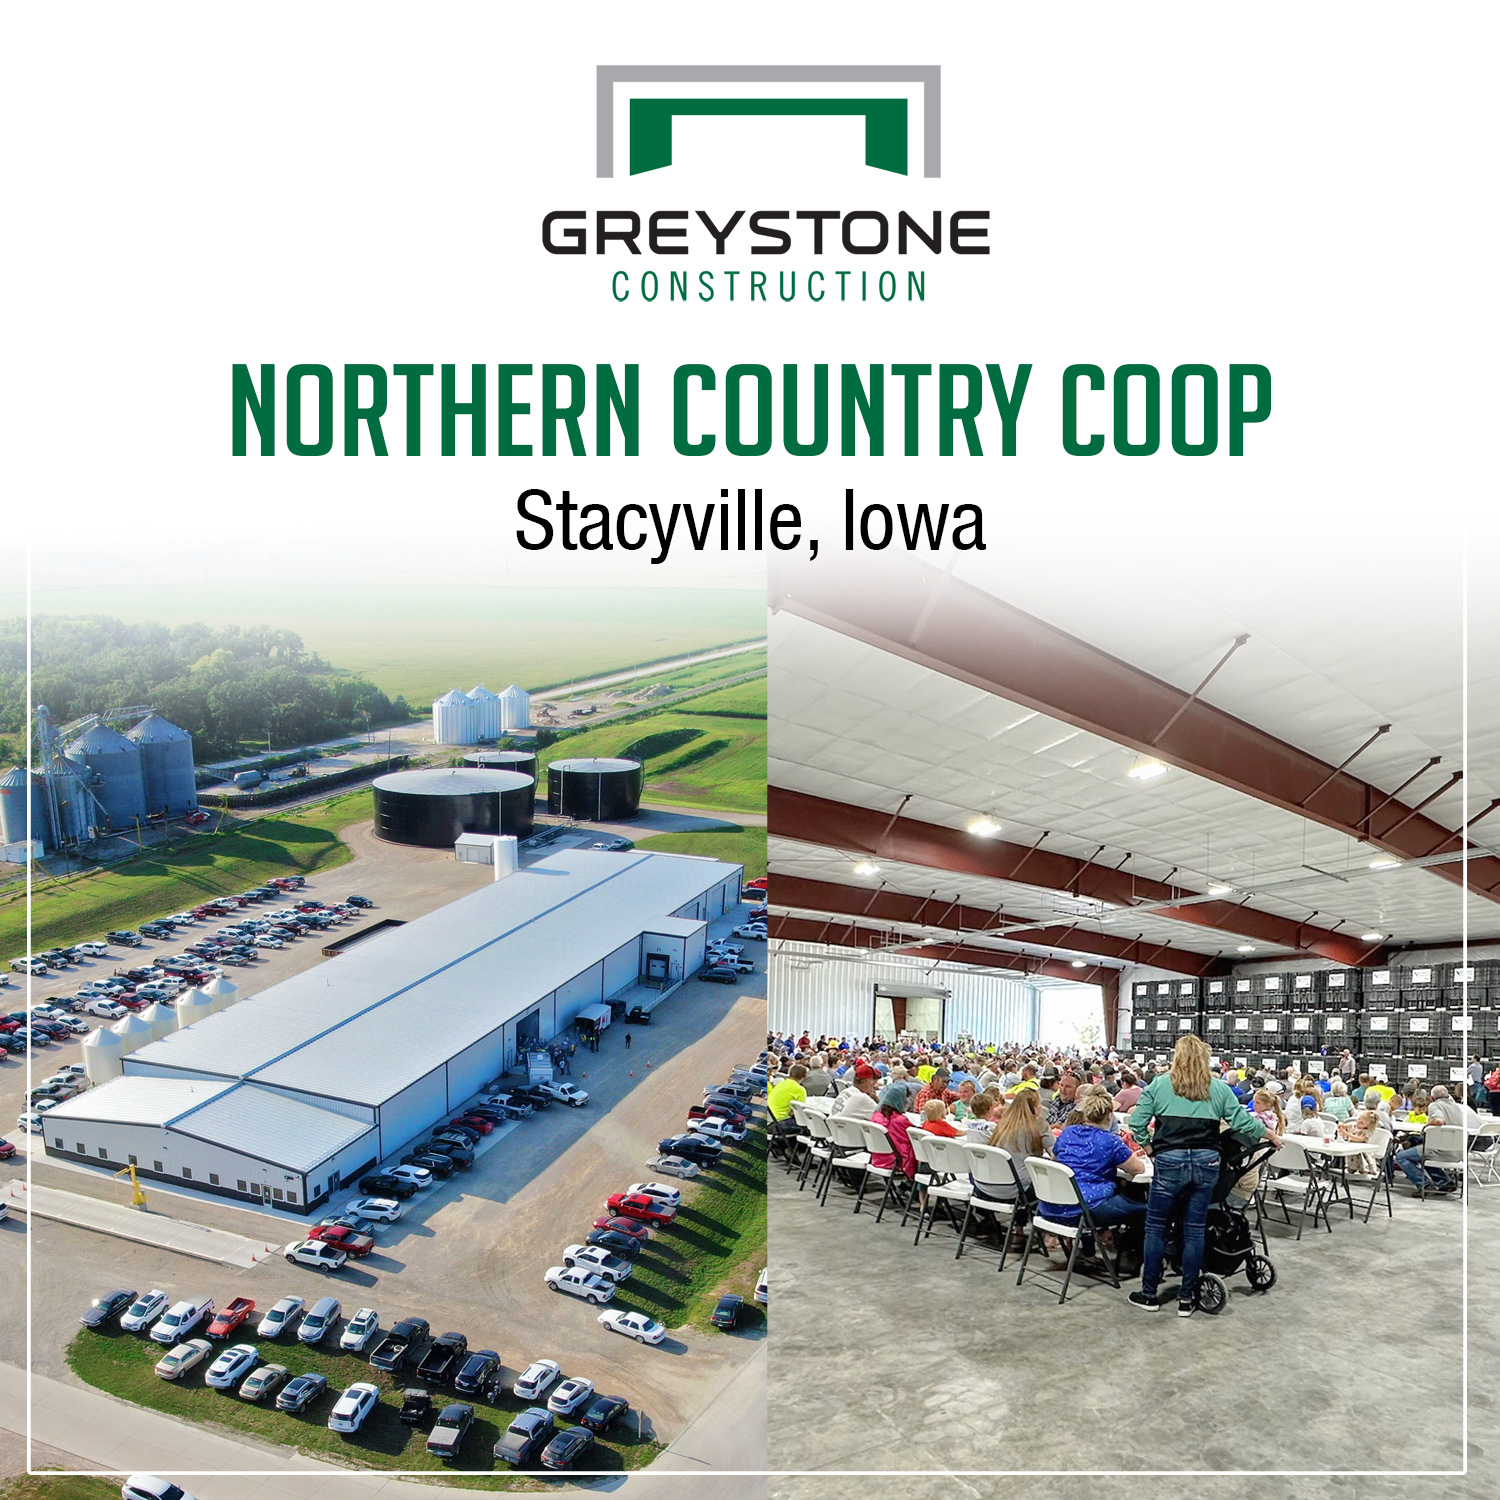 Northern Country Coop chemical warehouse in Stacyville Iowa